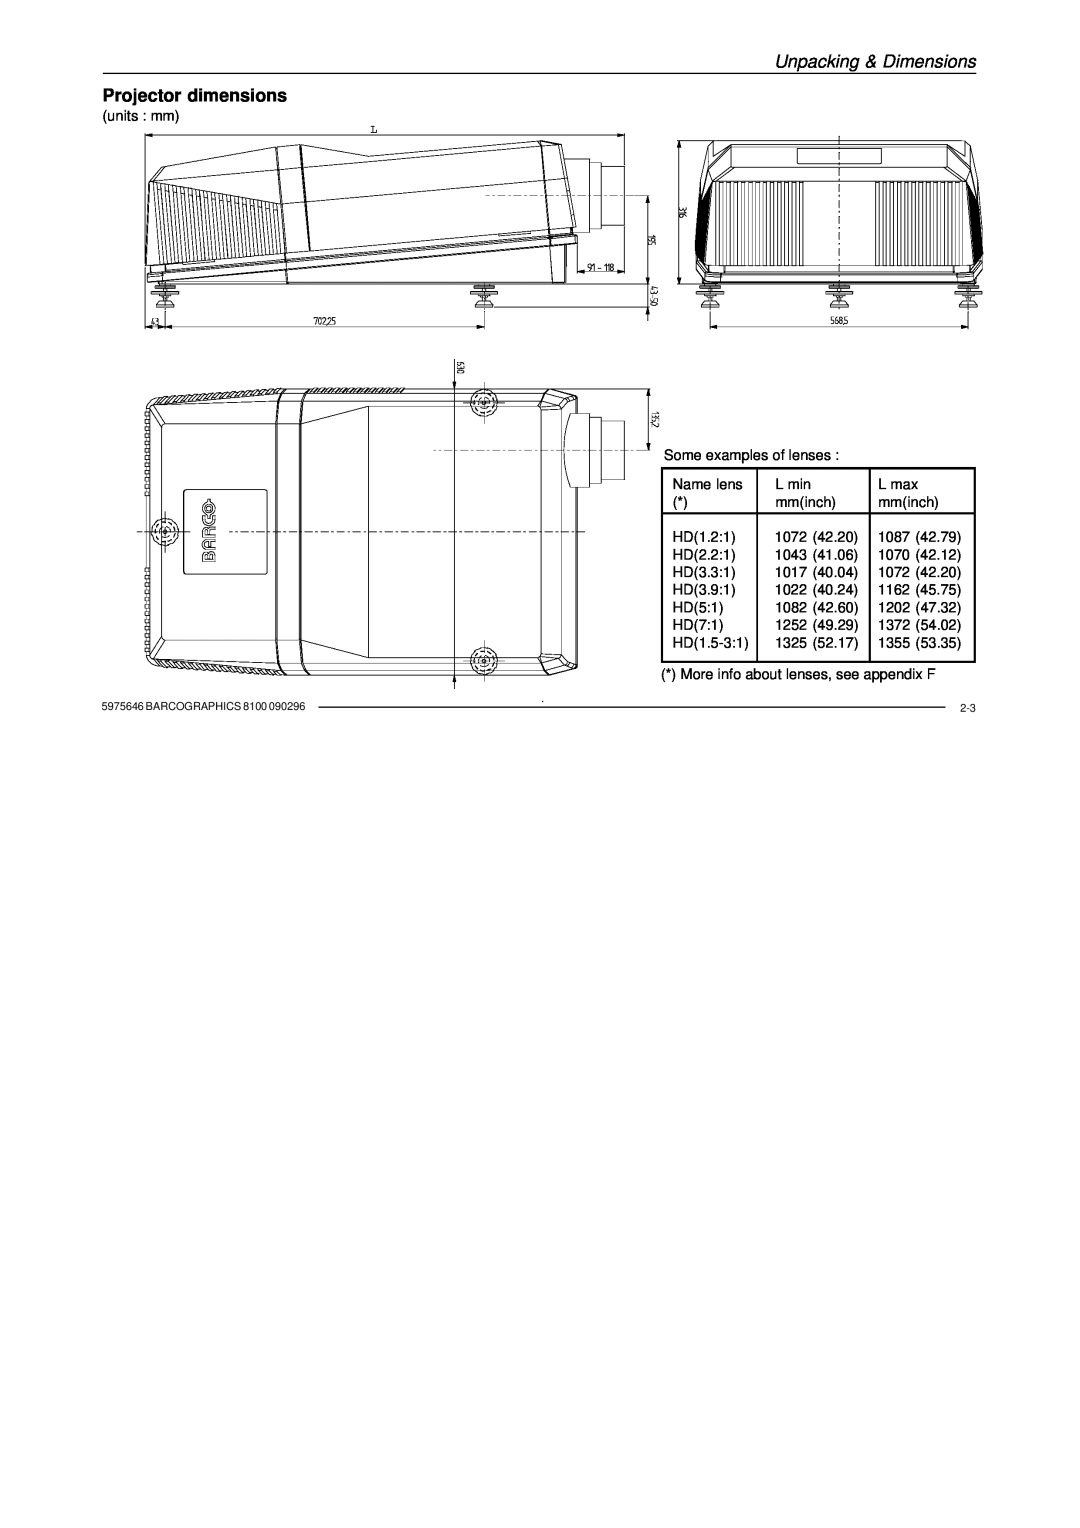 Barco R9001330 owner manual Projector dimensions, Unpacking & Dimensions 